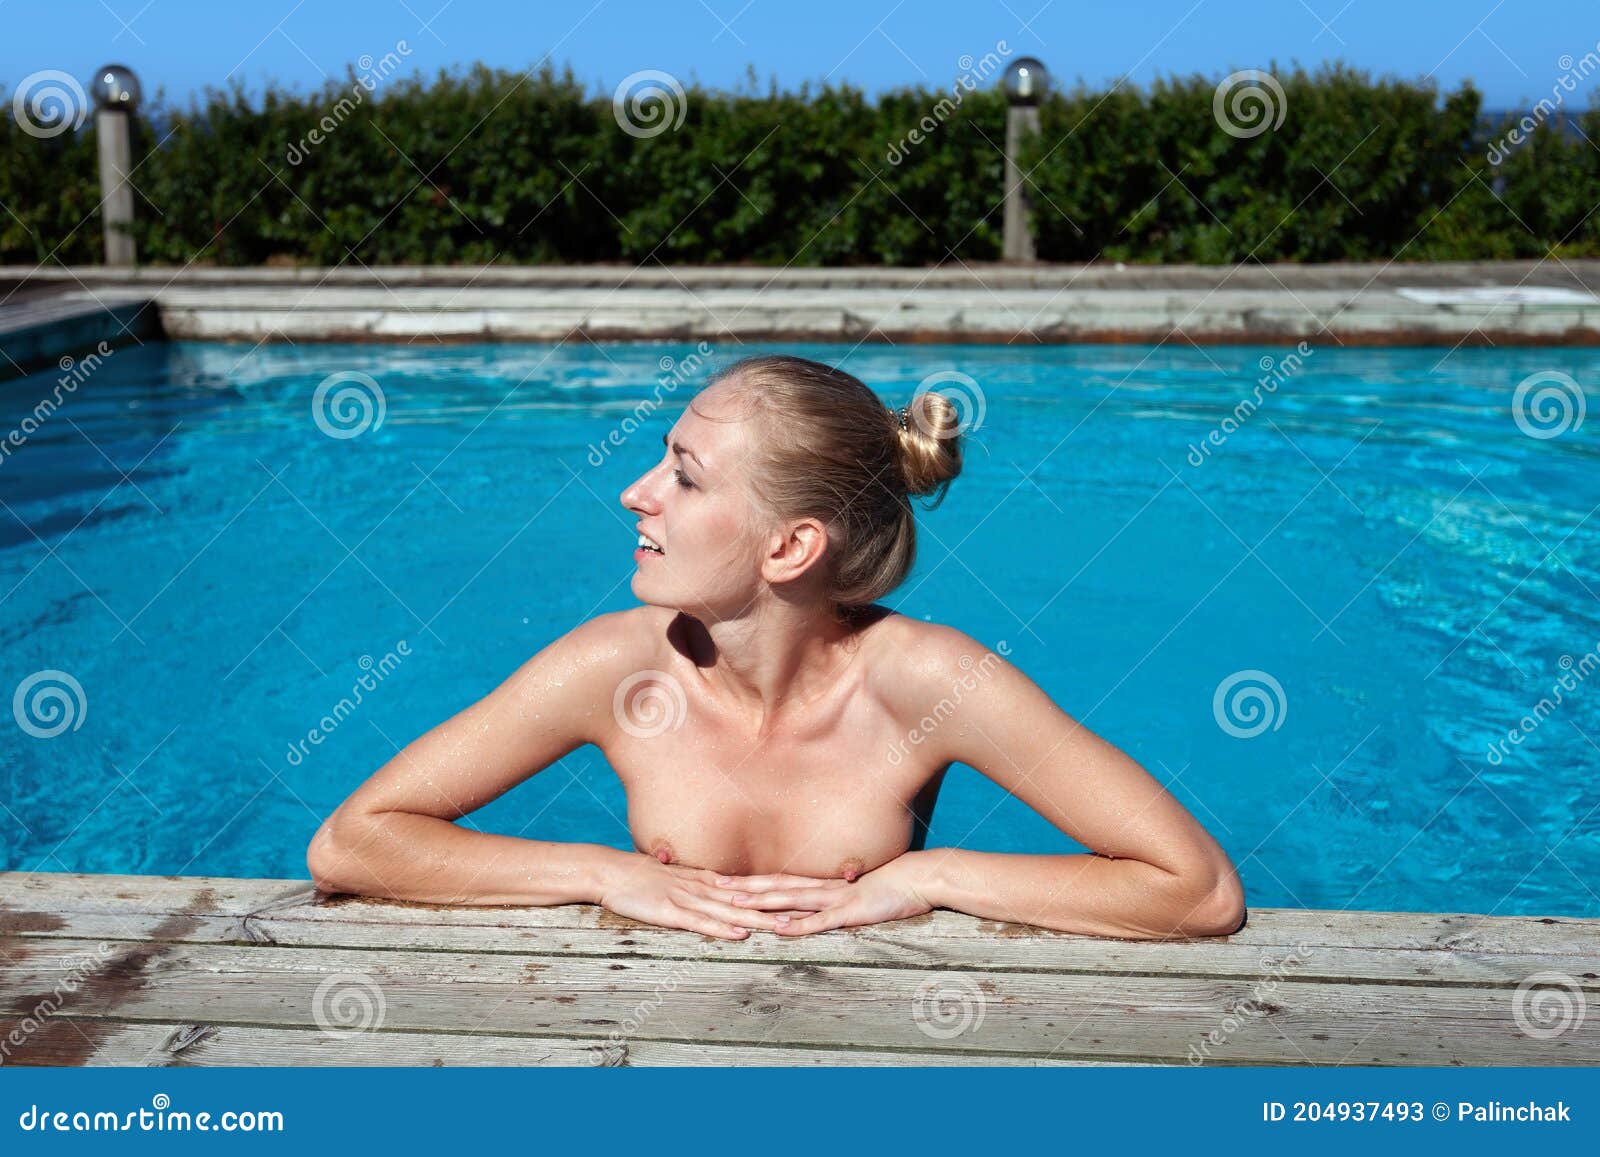 51 Nudist Pool Stock Photos, Images & Pictures